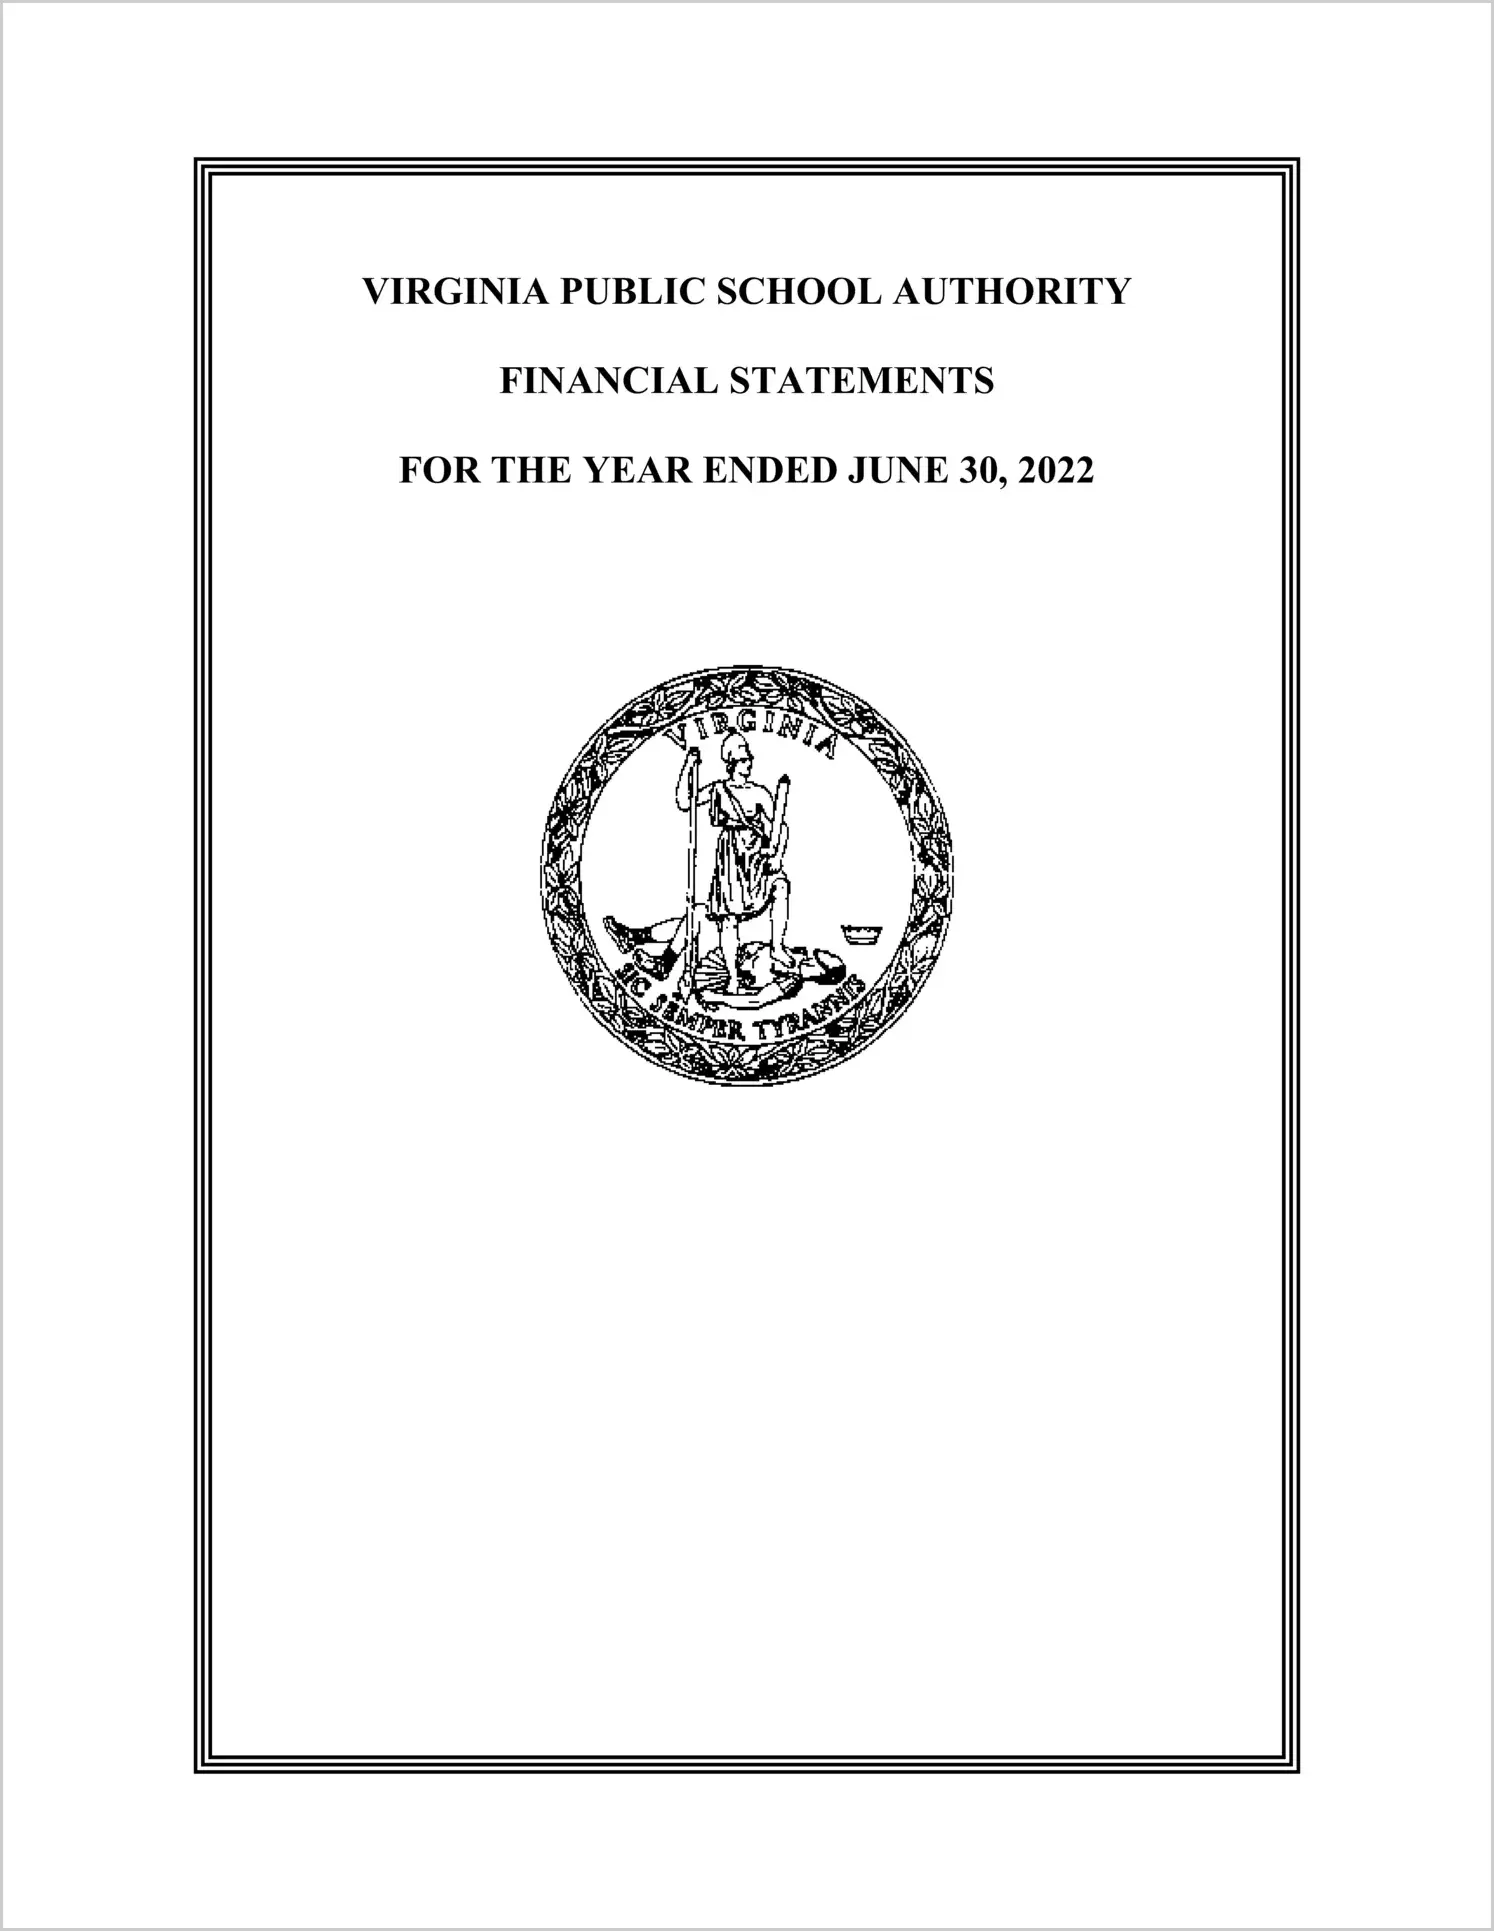 Virginia Public School Authority Financial Statements for the year ended June 30, 2022